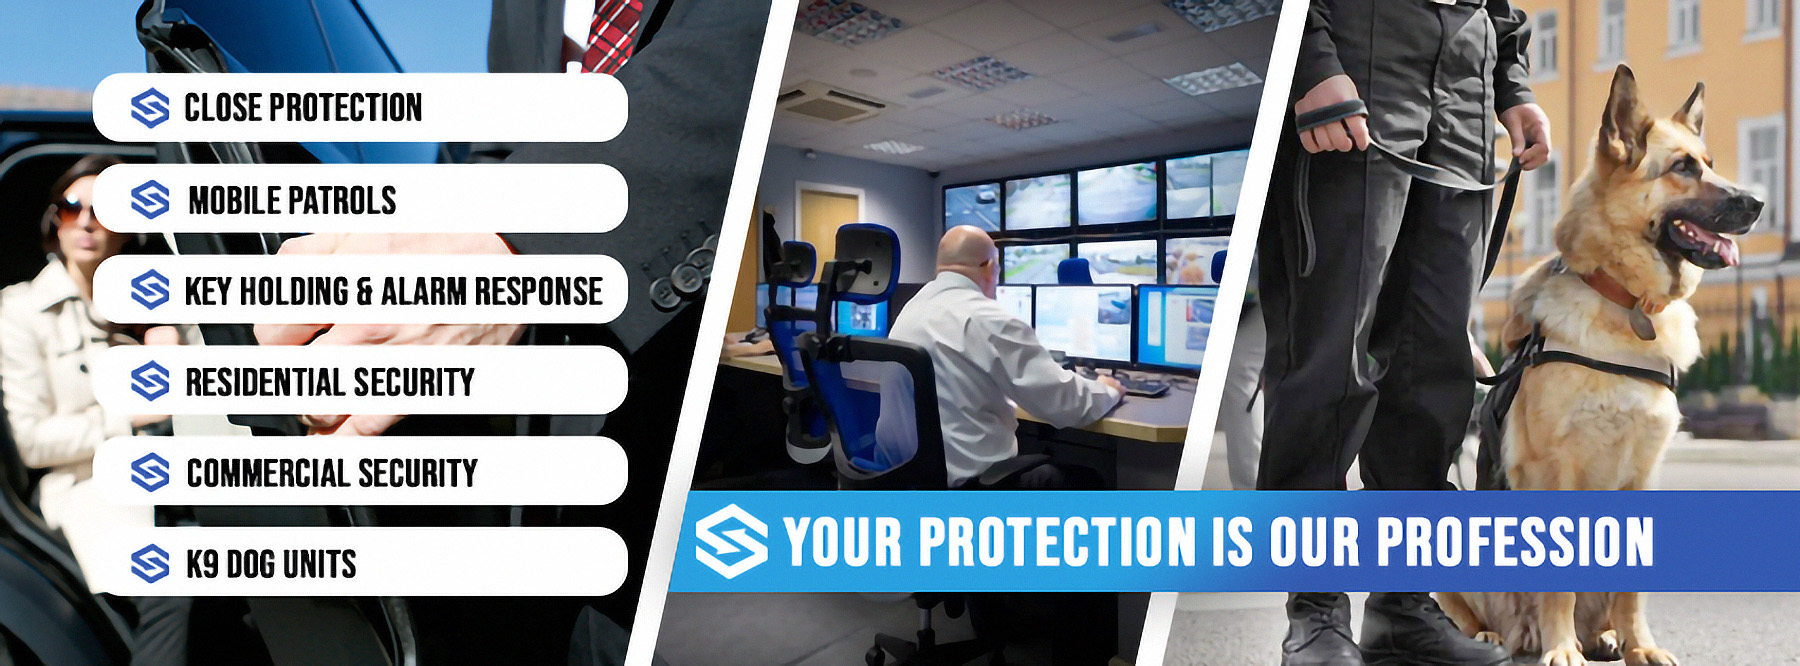 Security Services In Essex | S-Type Security